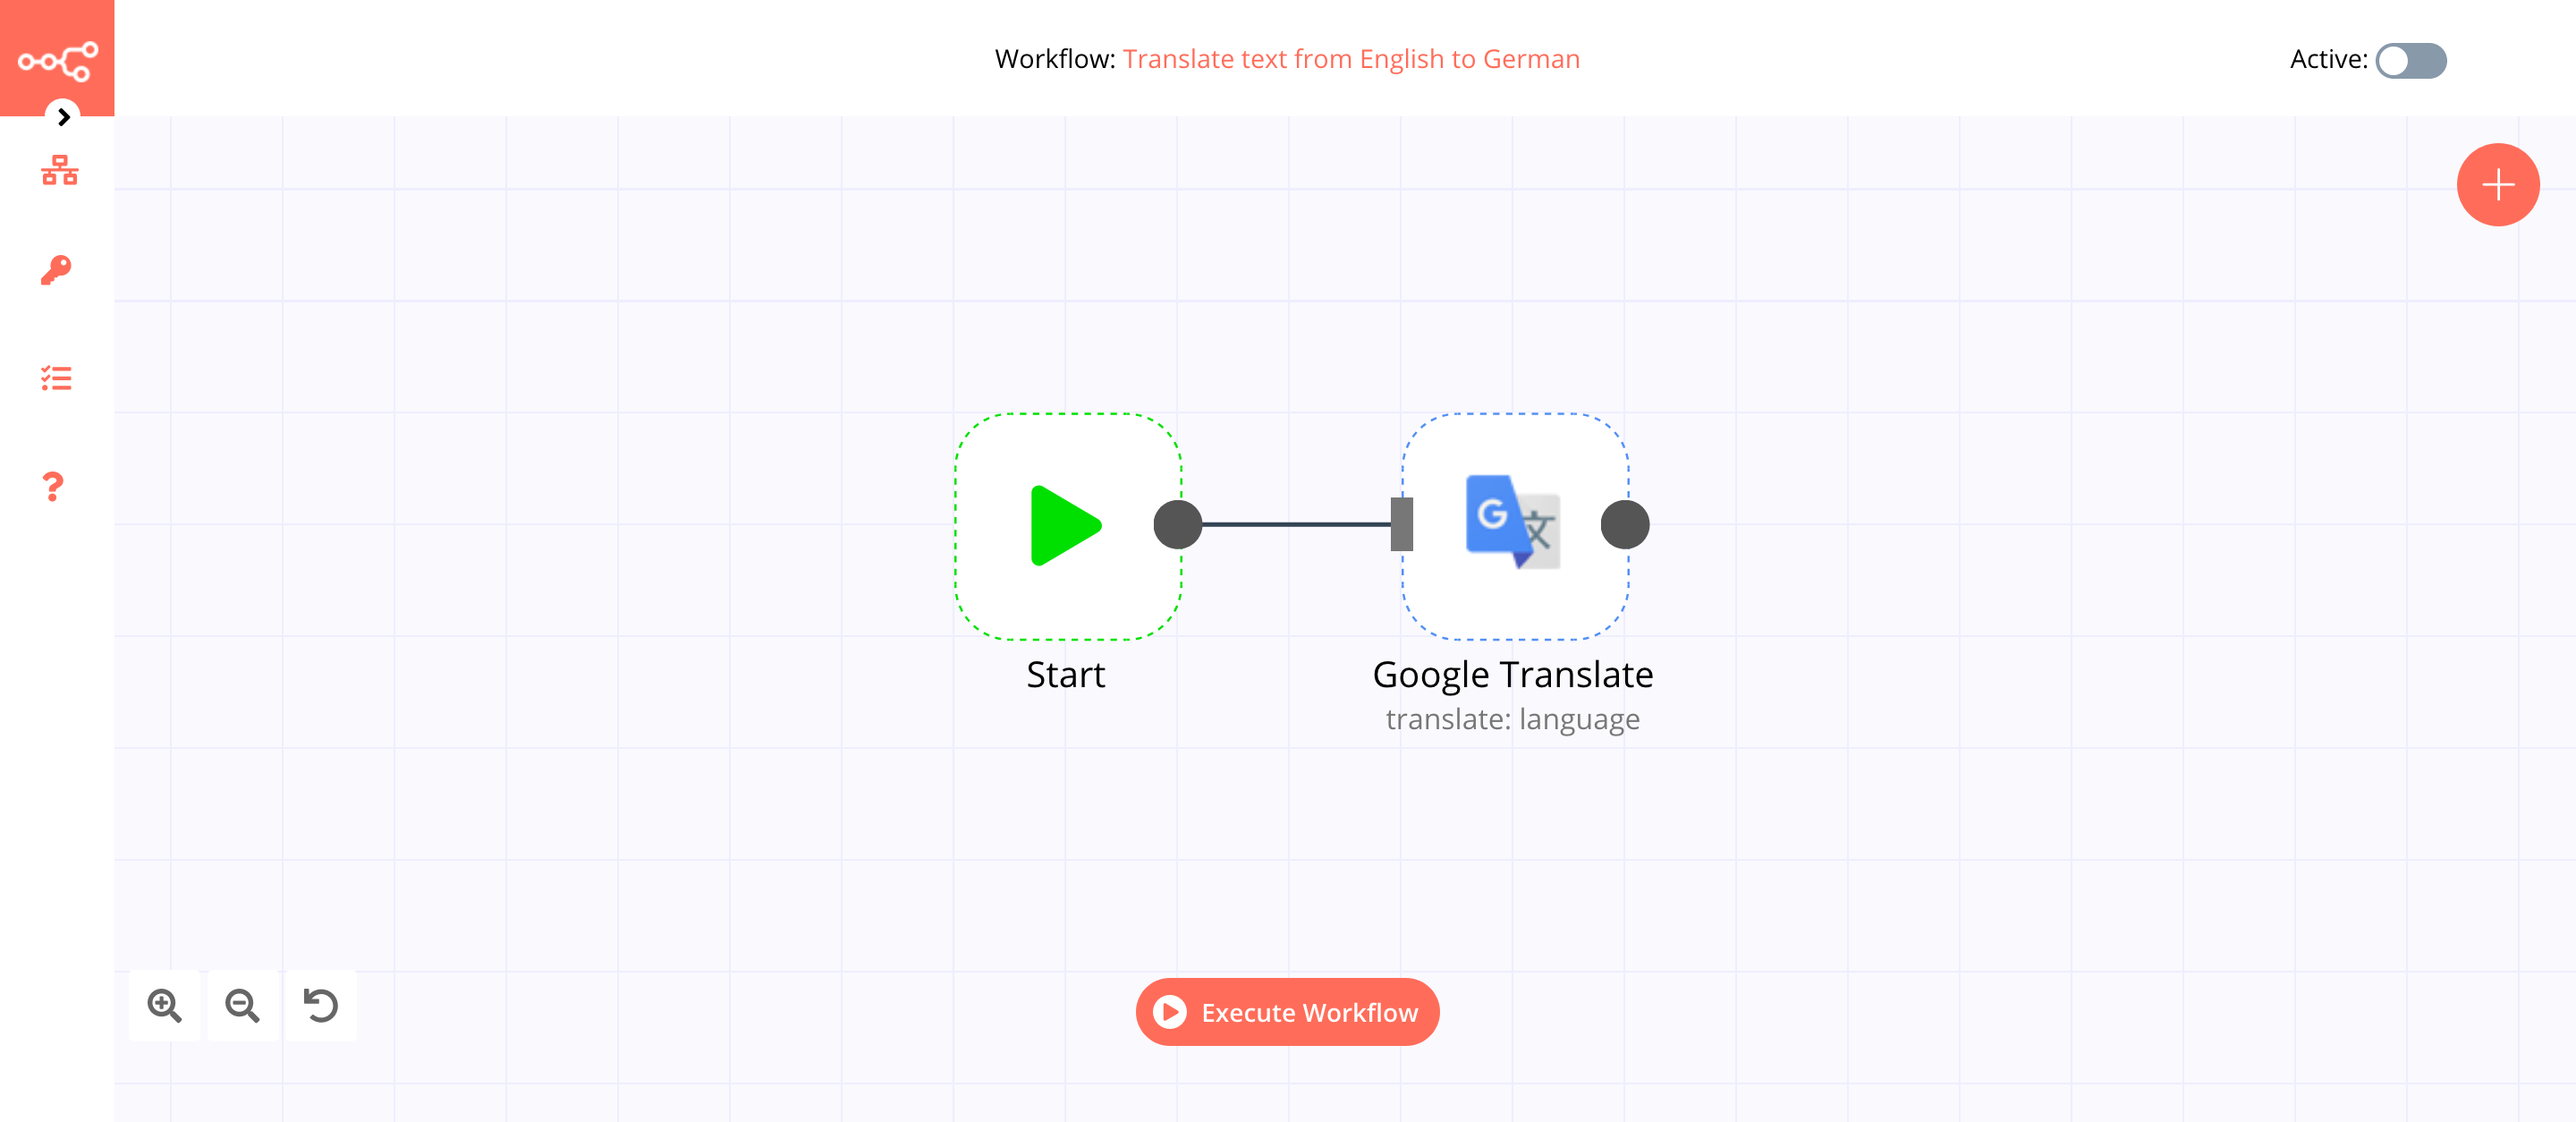 A workflow with the Google Translate node